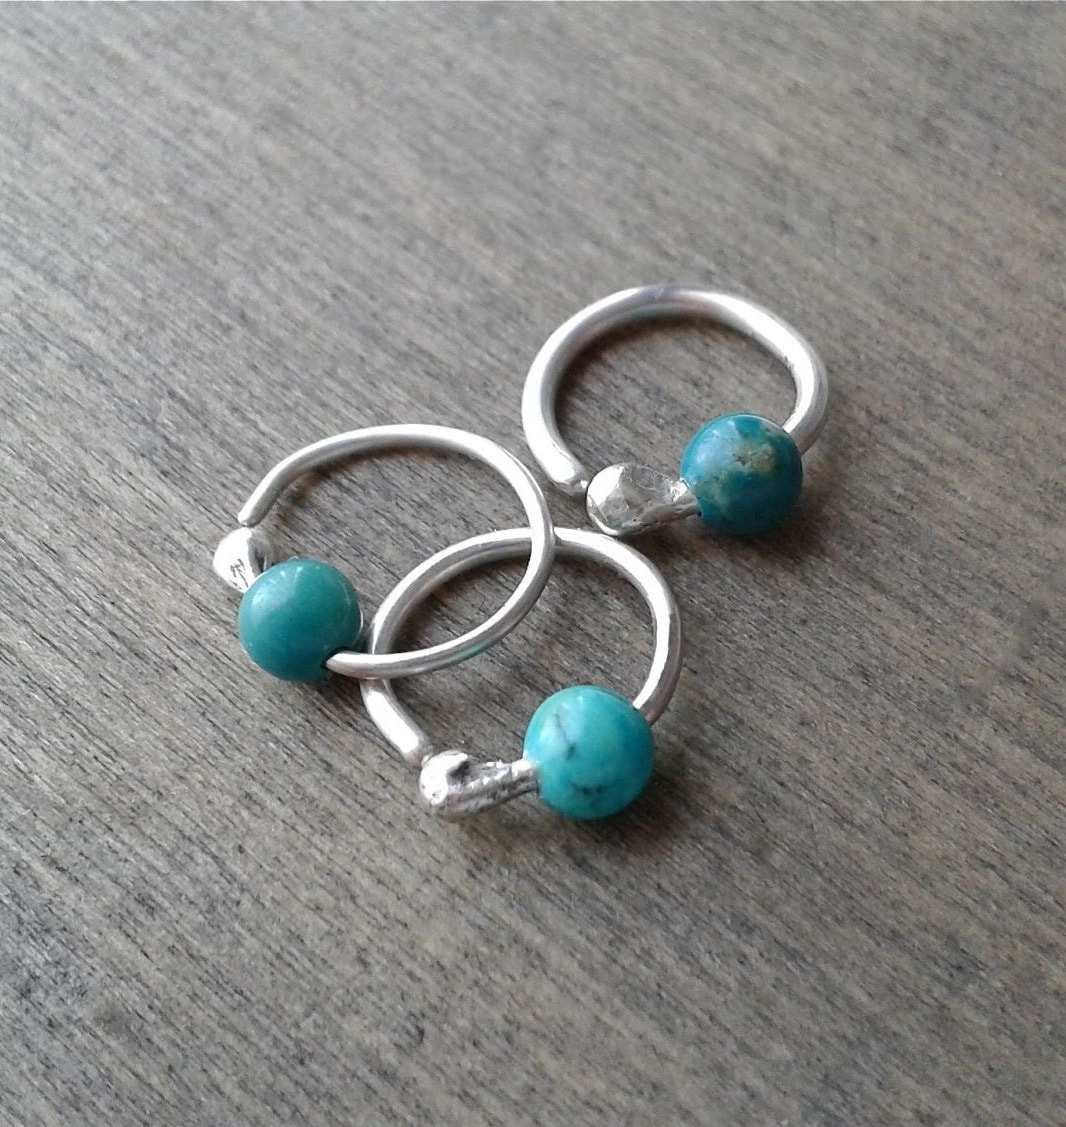 Silver hoops with turquoise for tragus, daith, and more